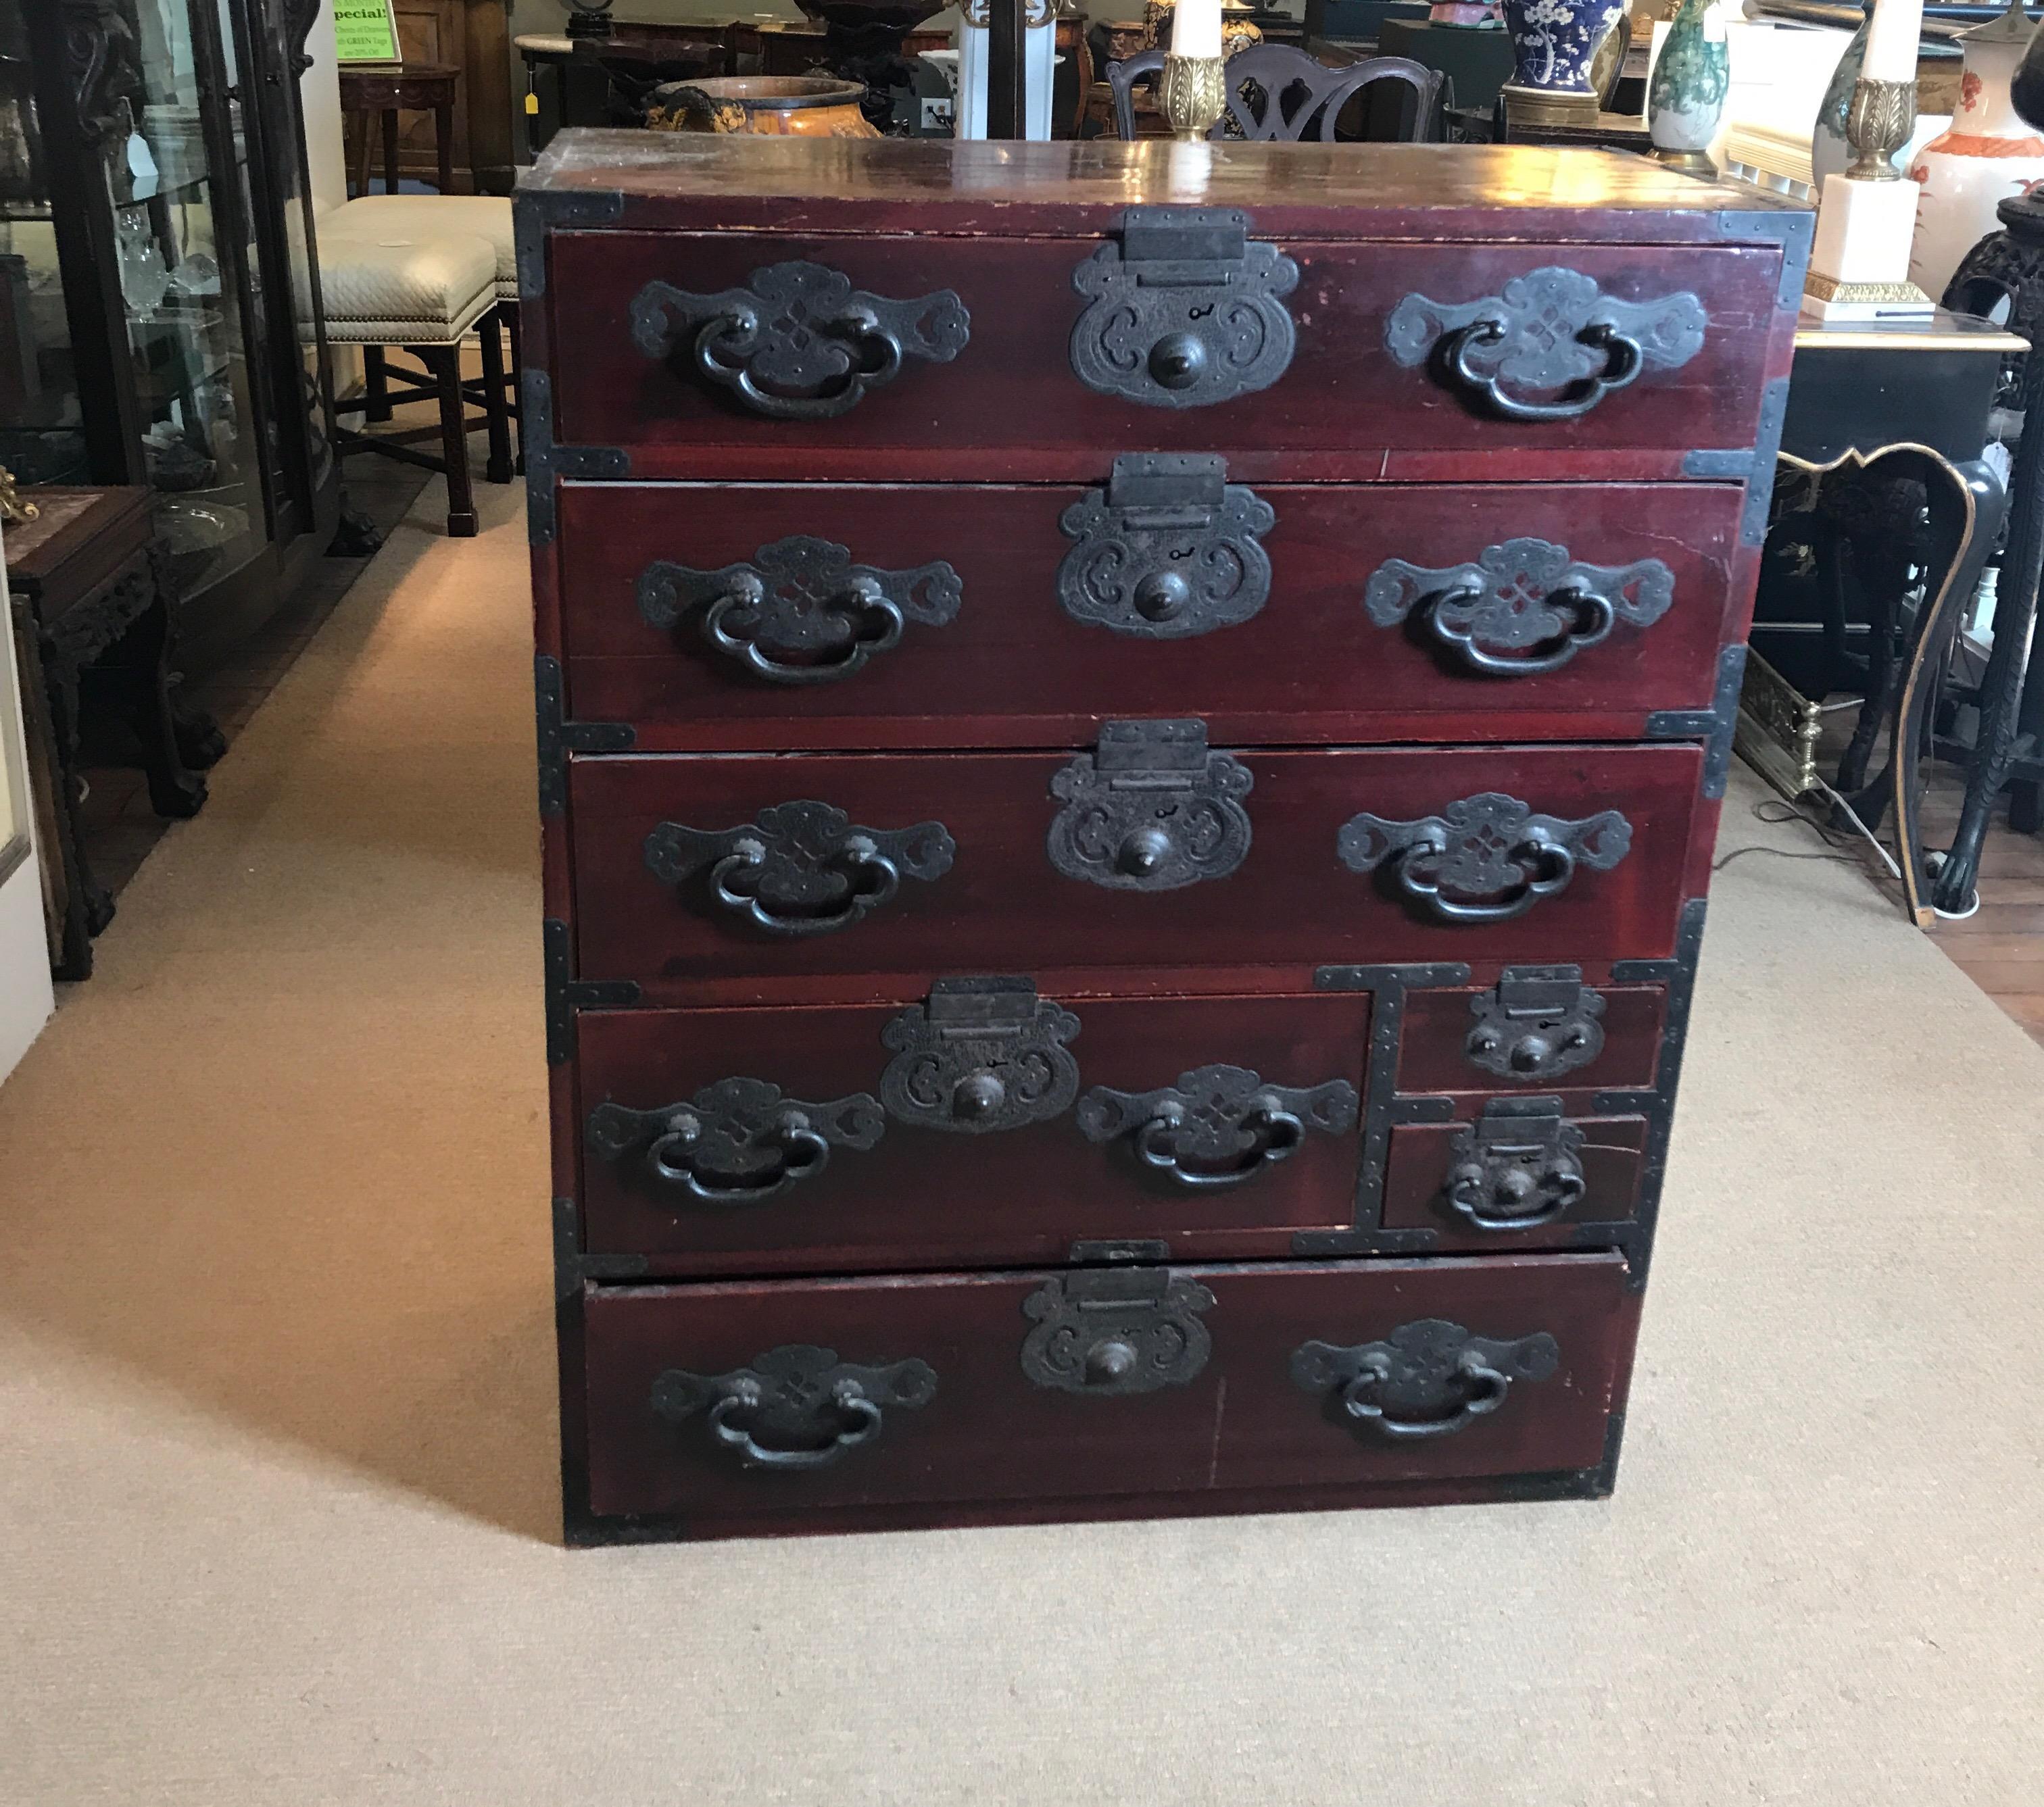 Original antique lacquered Tansu chest with iron hardware. The handmade hardware of very high quality attached to a hardwood chest with original worn lacquer. The piece is in original unaltered condition showing shrinkage of the boards with